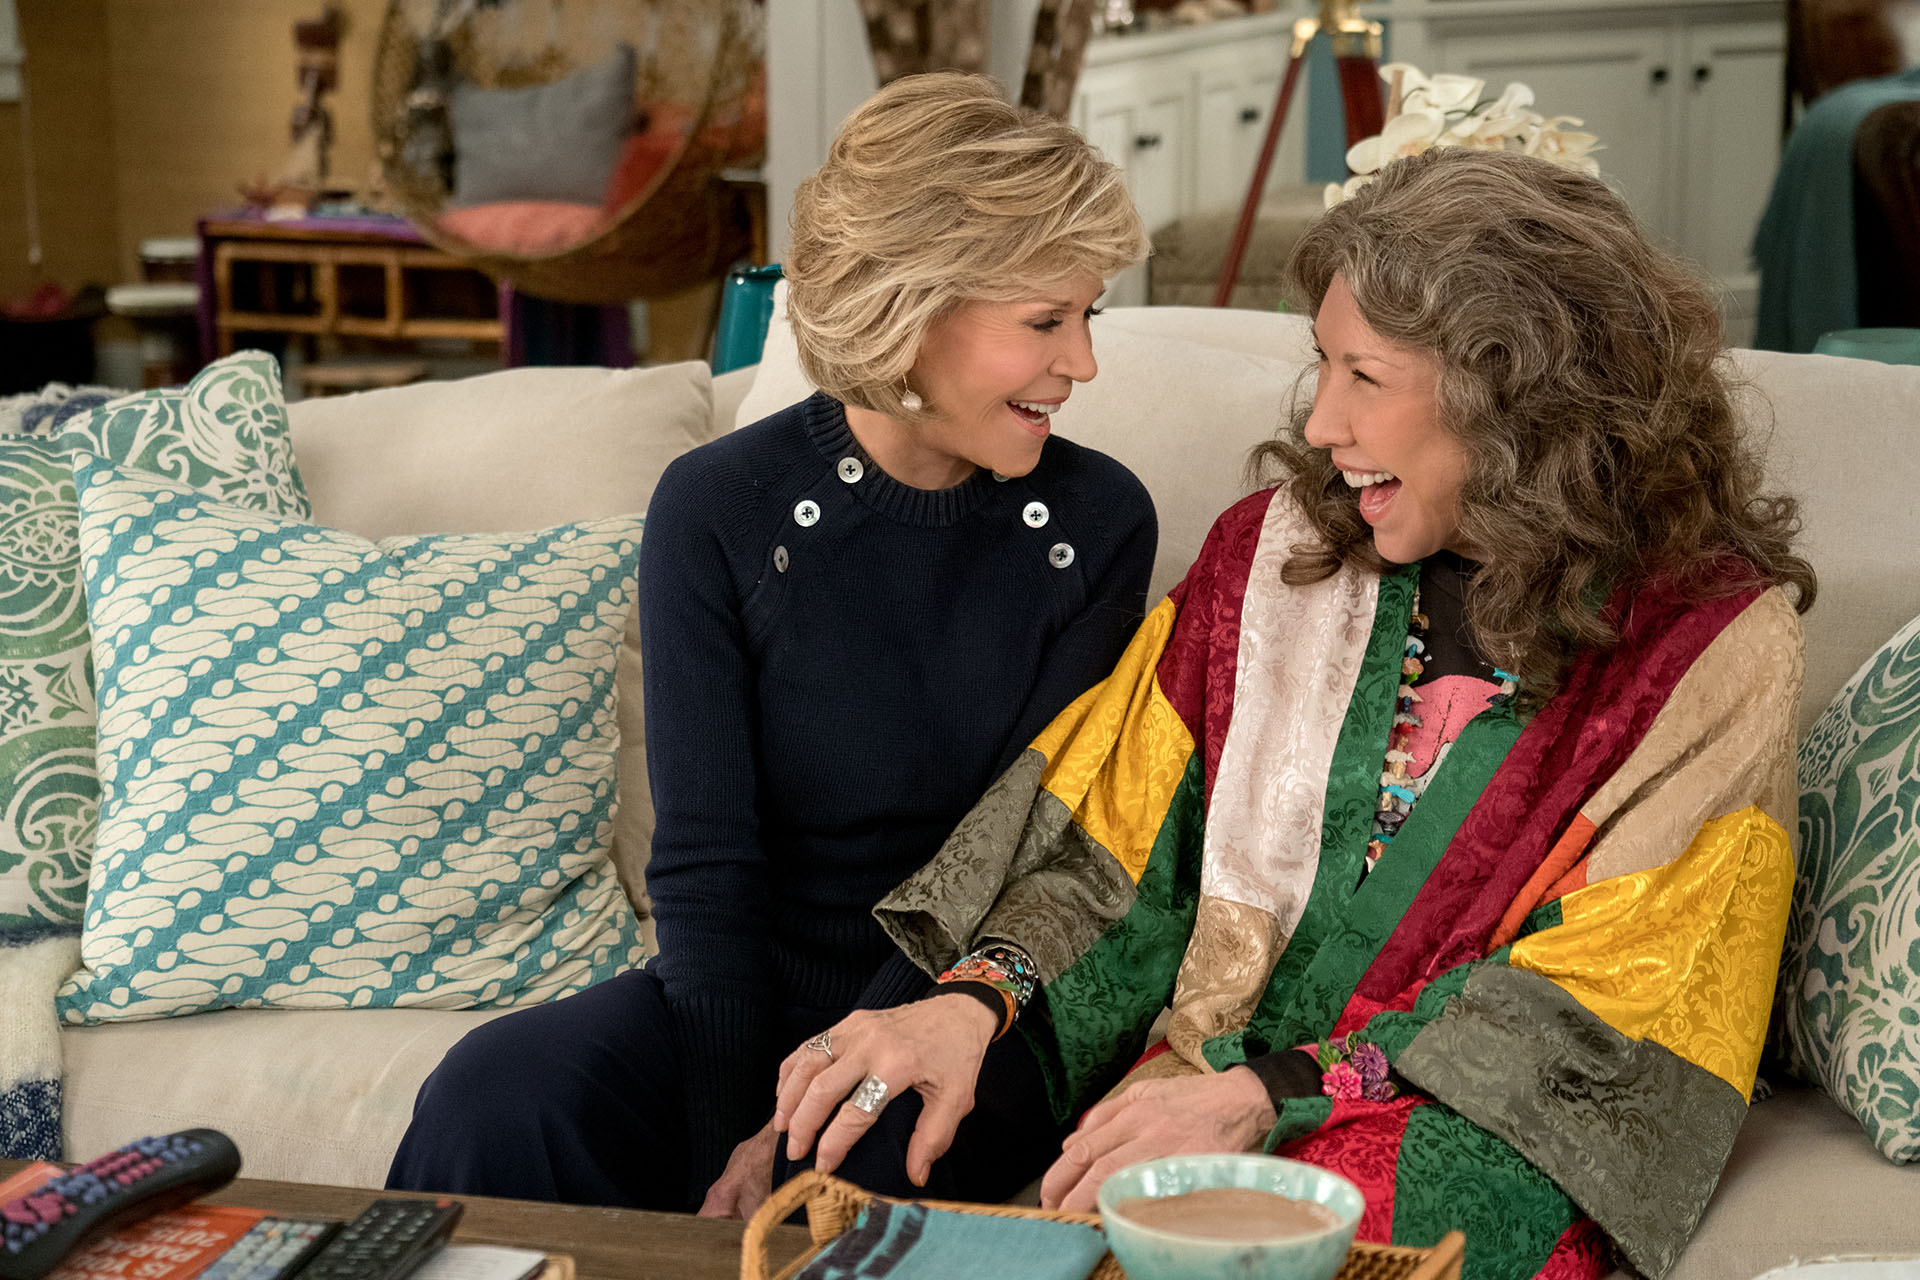 Jane Fonda and Lilly Tomlin in "Grace and Frankie".  (Netflix)